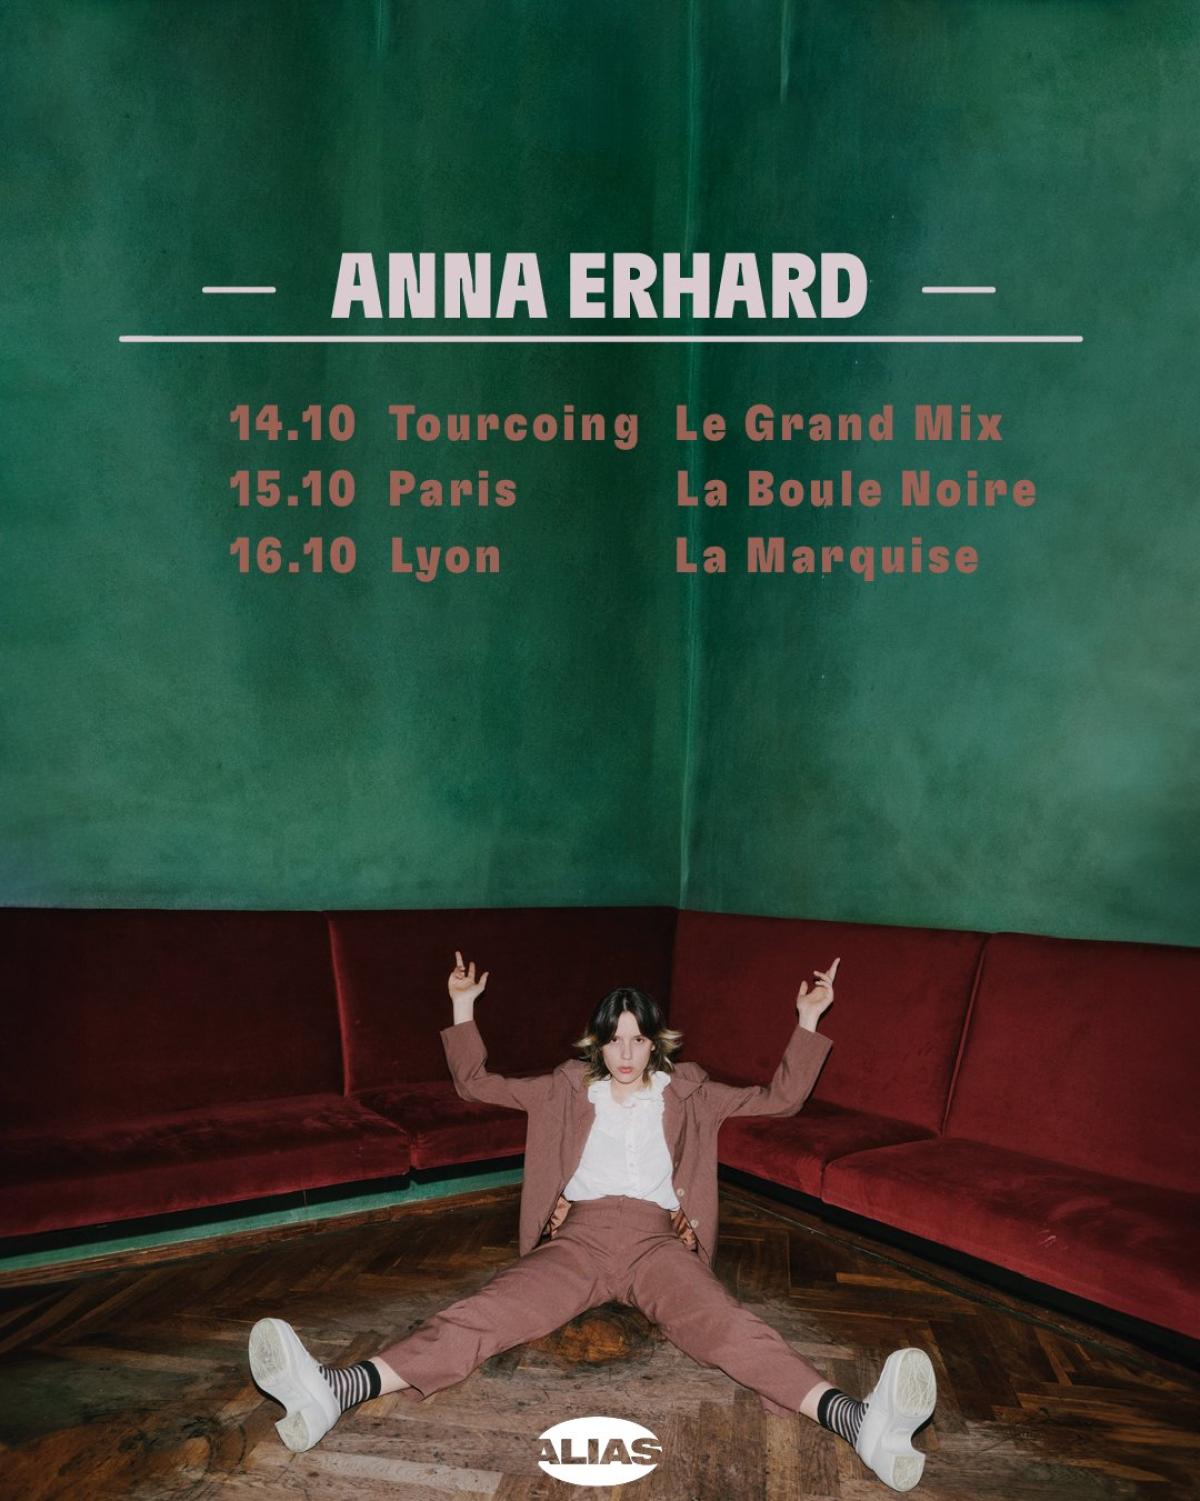 Anna Erhard at Le Grand Mix Tickets